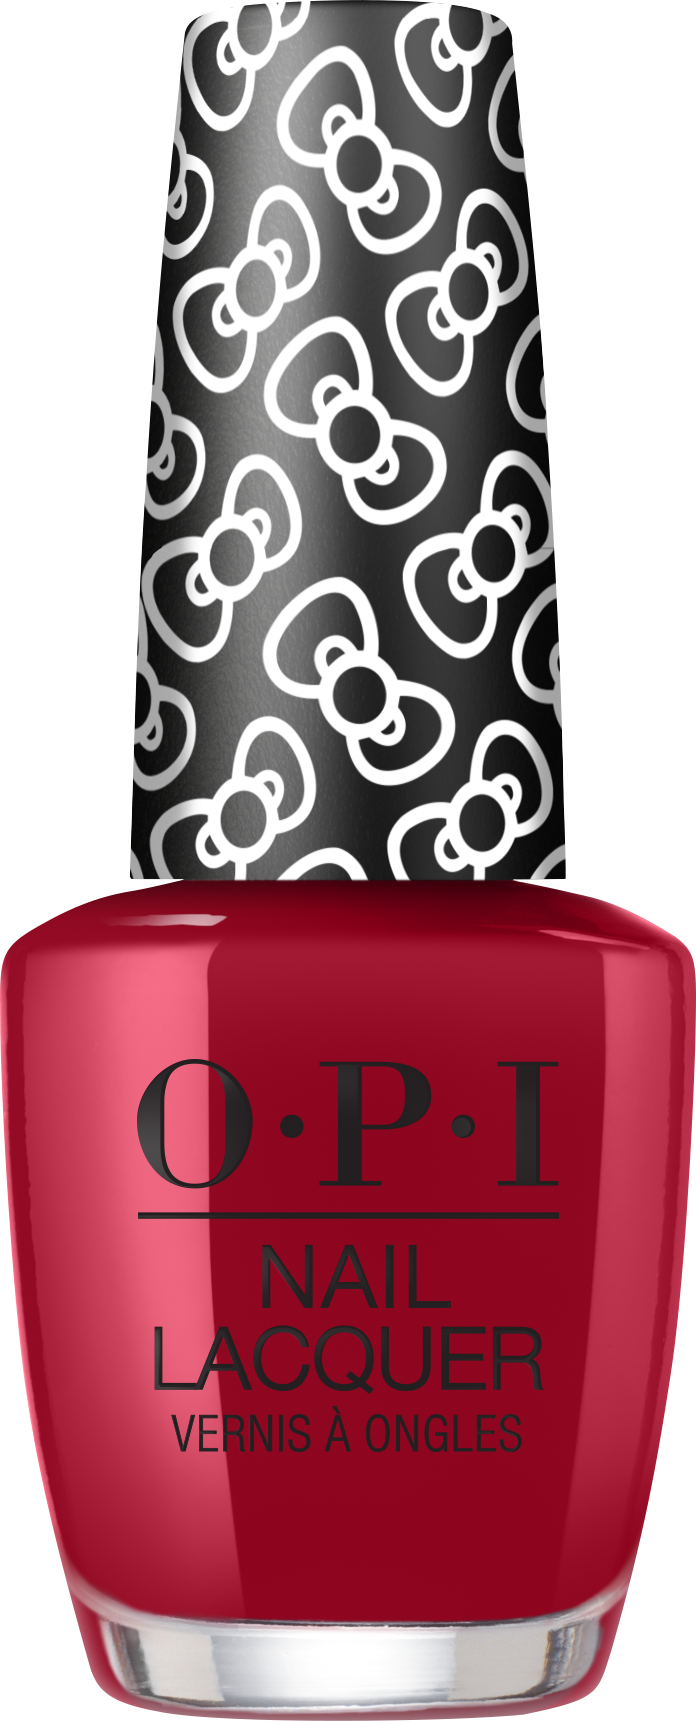 Review, Photos, Swatches, Best Nail Polish, Looks, Trends 2019, 2020: OPI x Hello Kitty, Holiday 2019 Collection